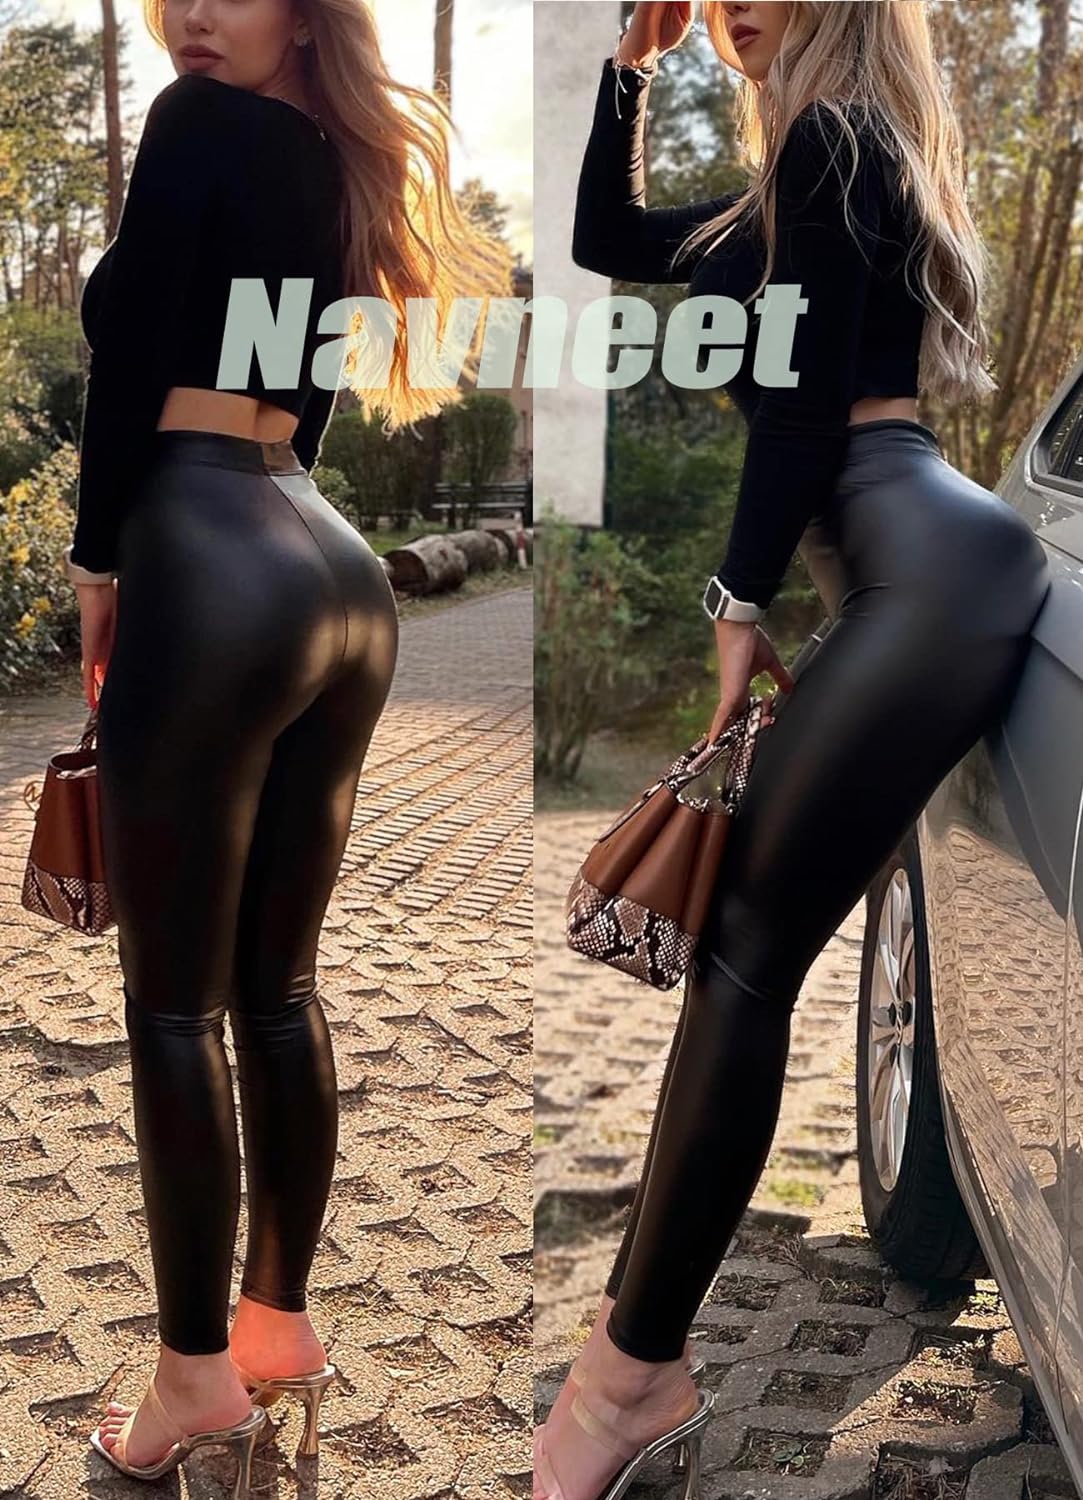 Navneet Women Faux Leather Pants High Waist PU Leggings Sexy Pleather Leggings Casual Push Up Tights